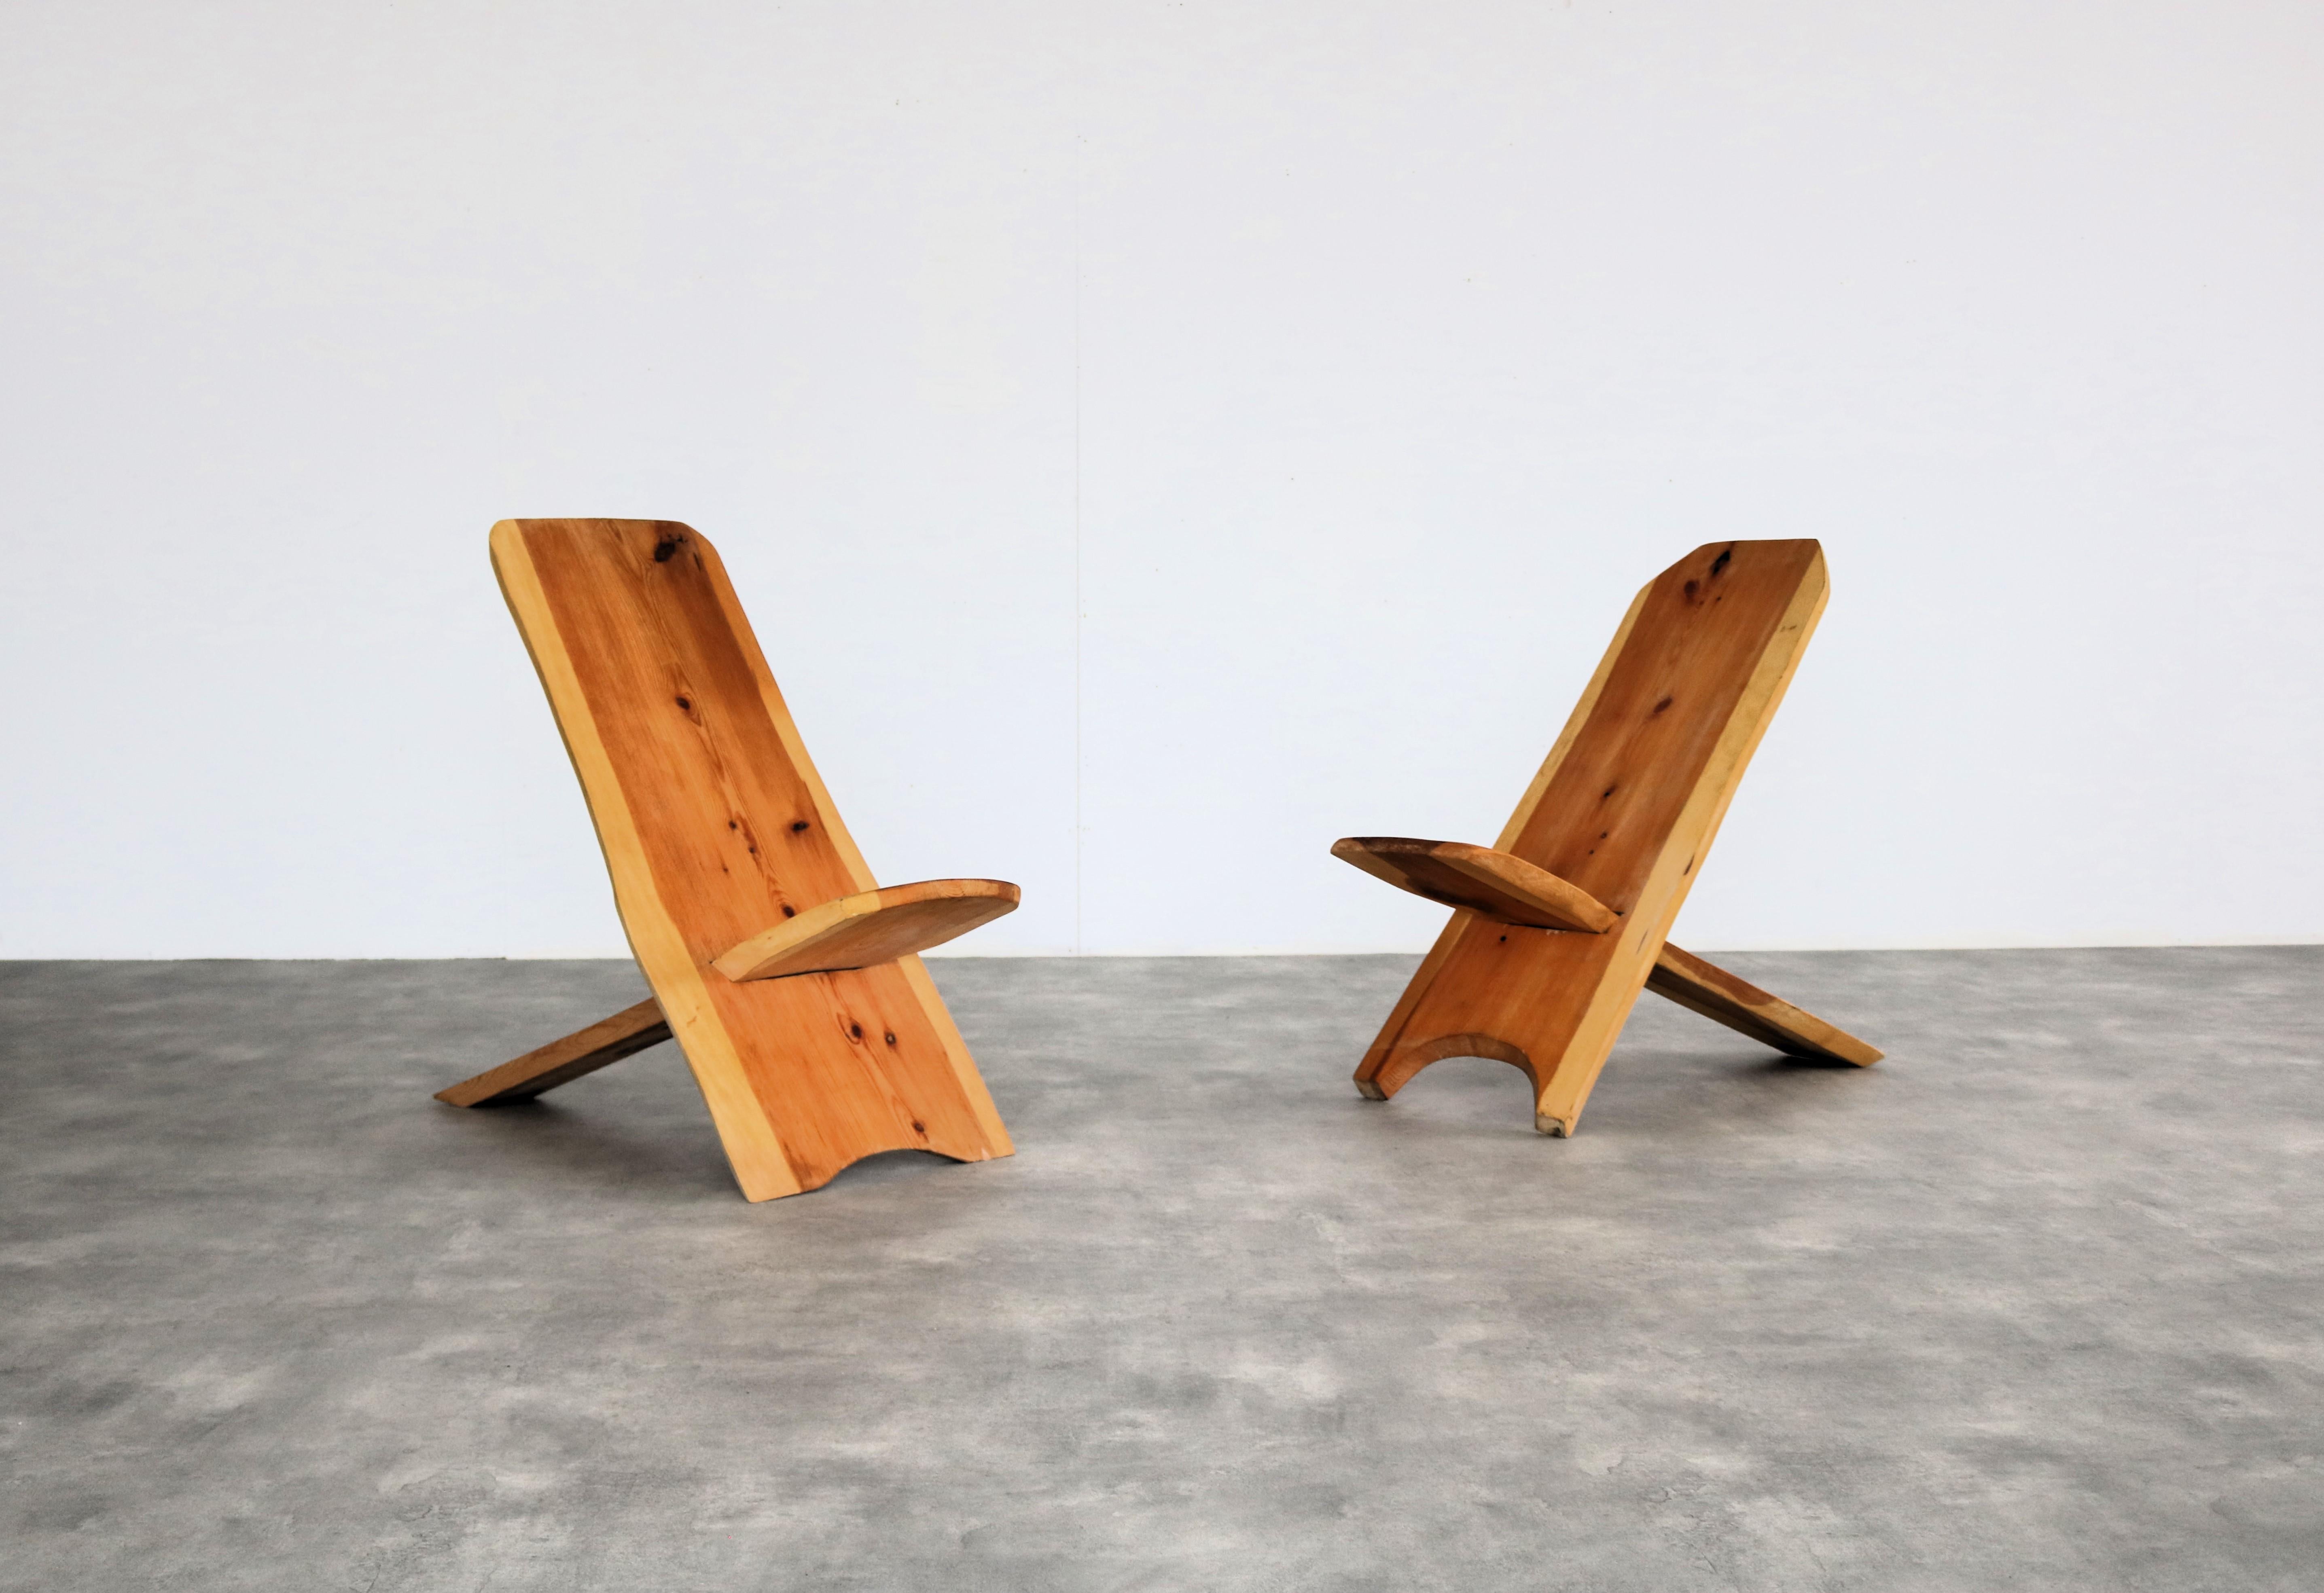 vintage chairs | palaver chairs | brutalist | Swedish

period | 70s
design | 